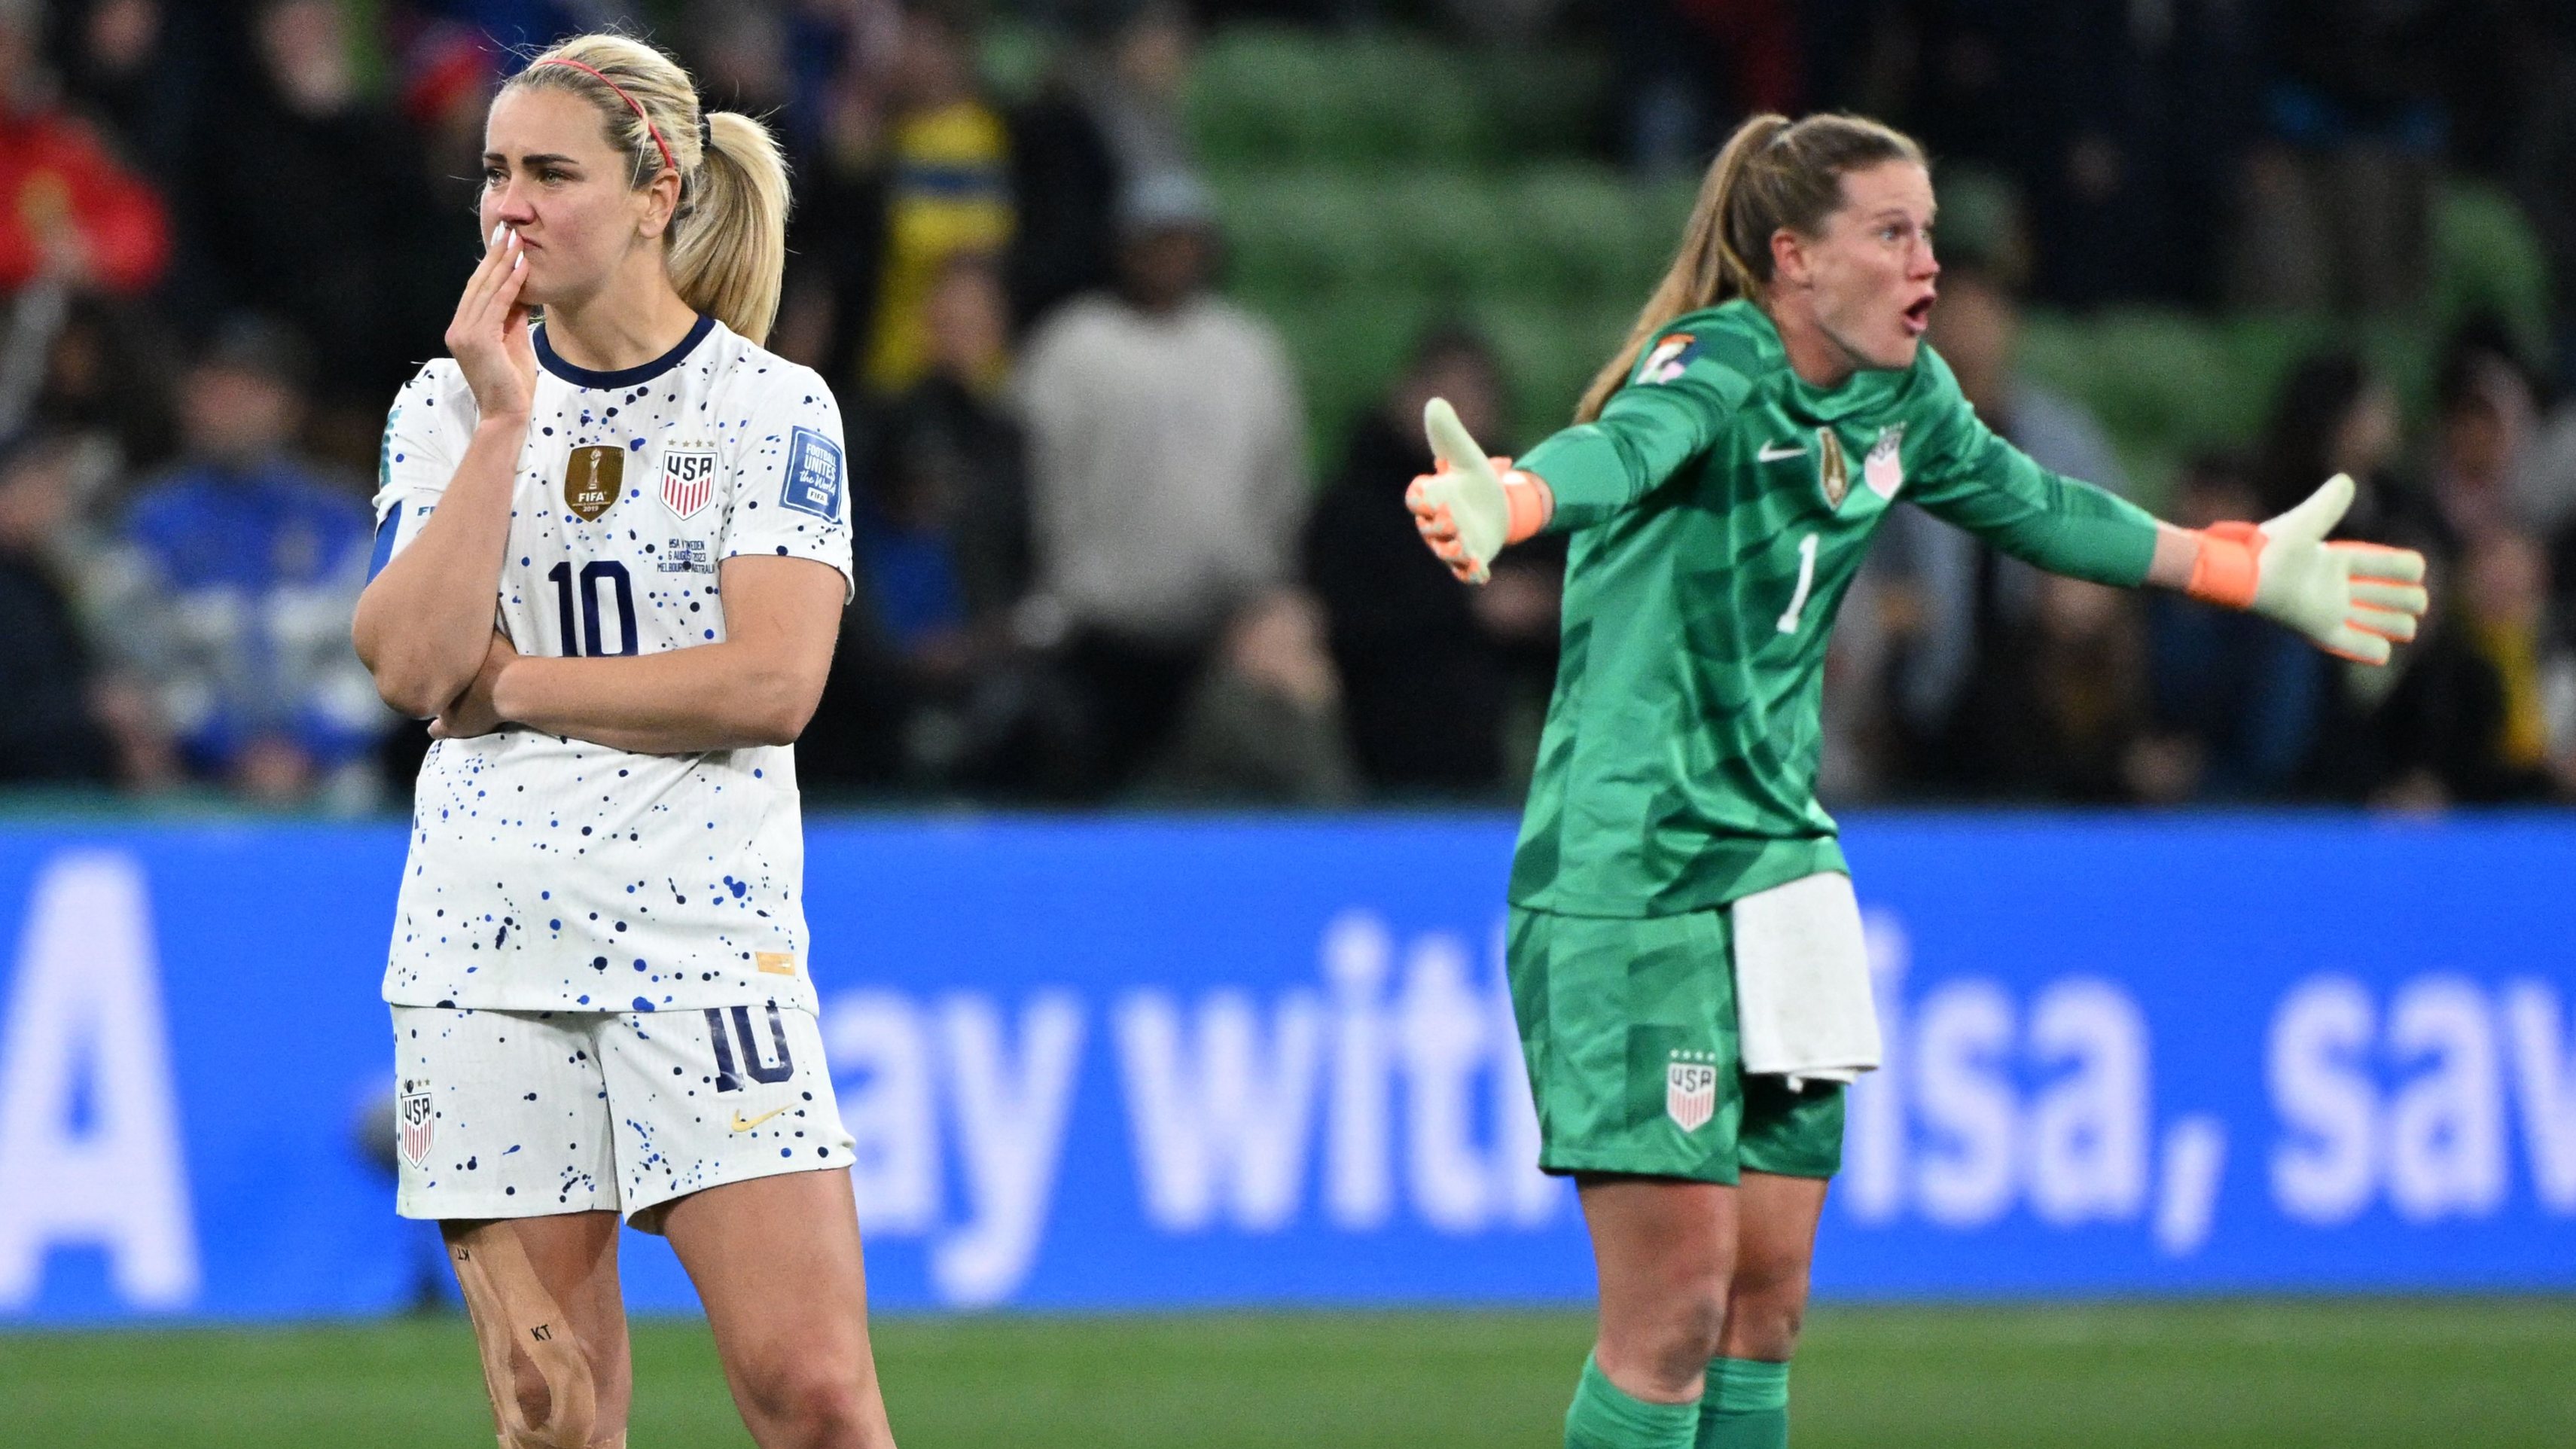 Sweden's Twitter lashes out at national women's soccer team - The